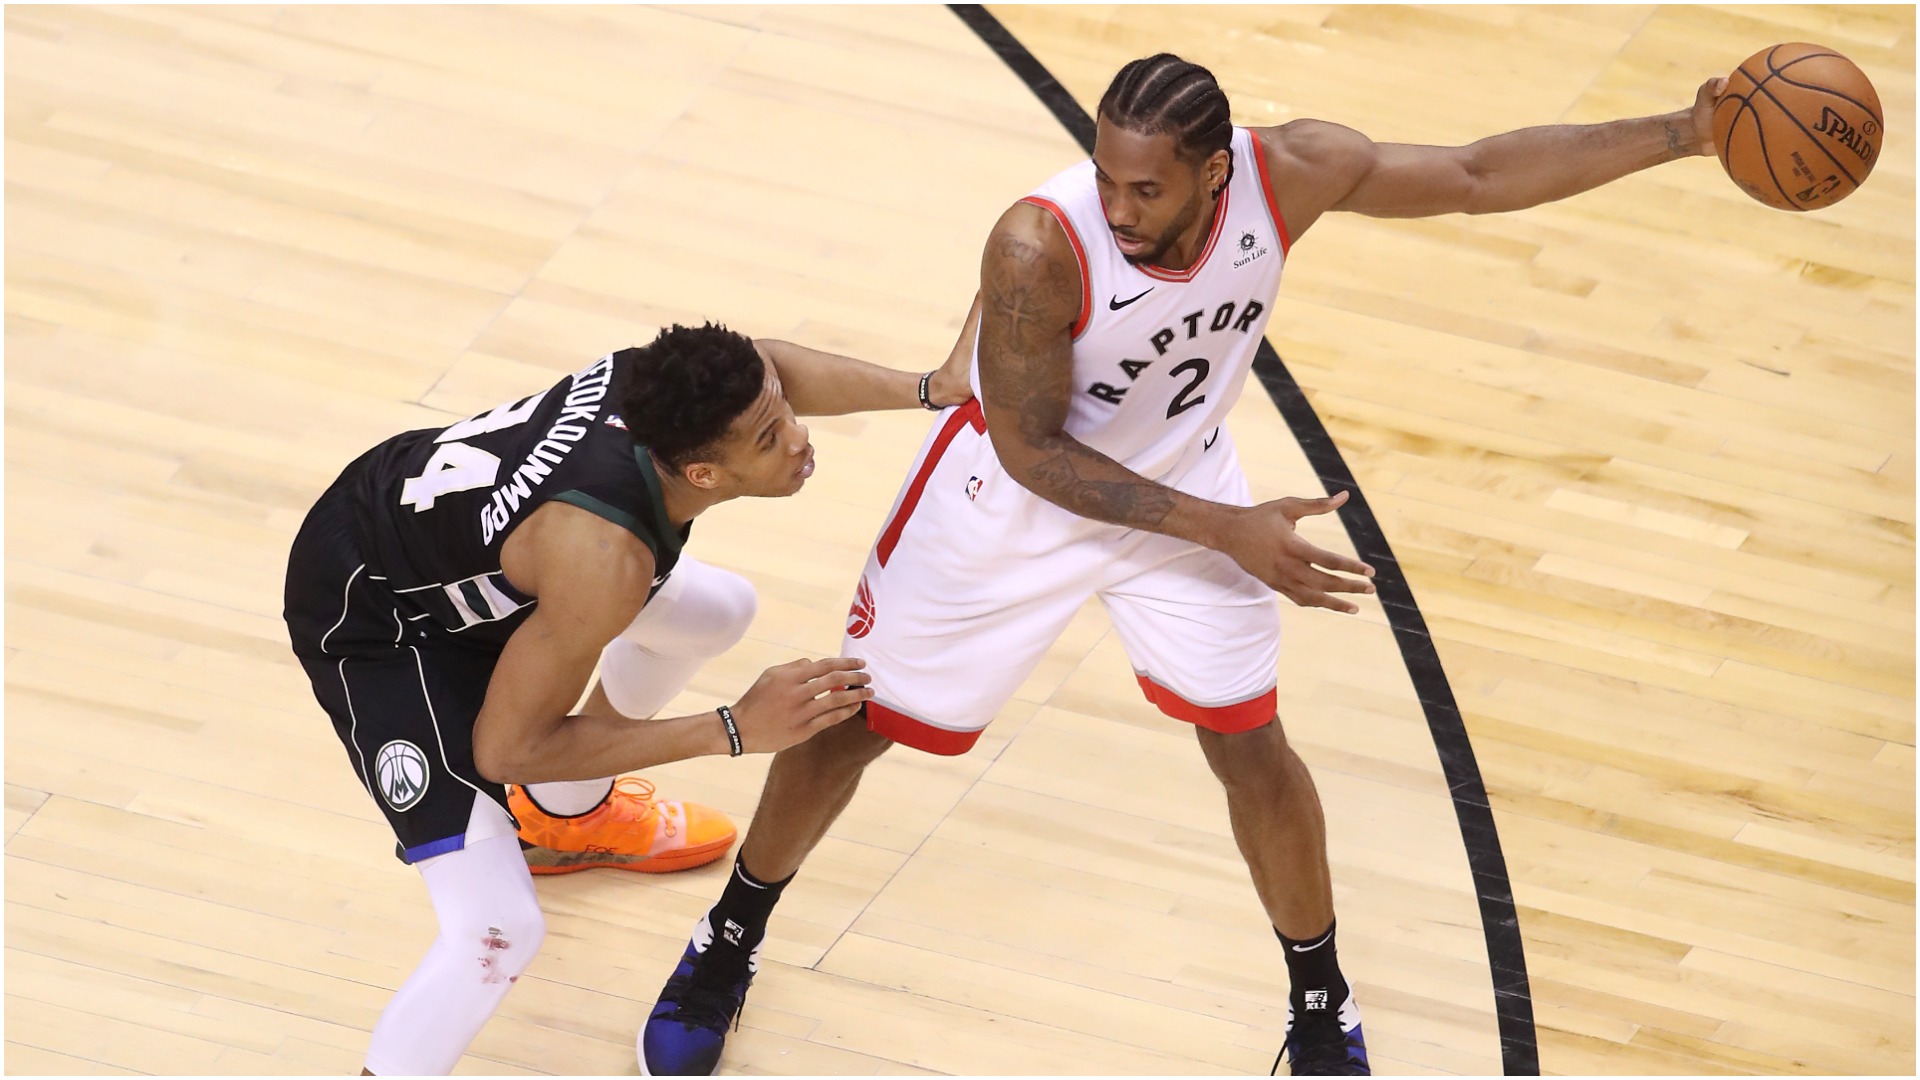 Kawhi Leonard's experience as a former NBA champion made him the star man in the Eastern Conference Finals, says Giannis Antetokounmpo.